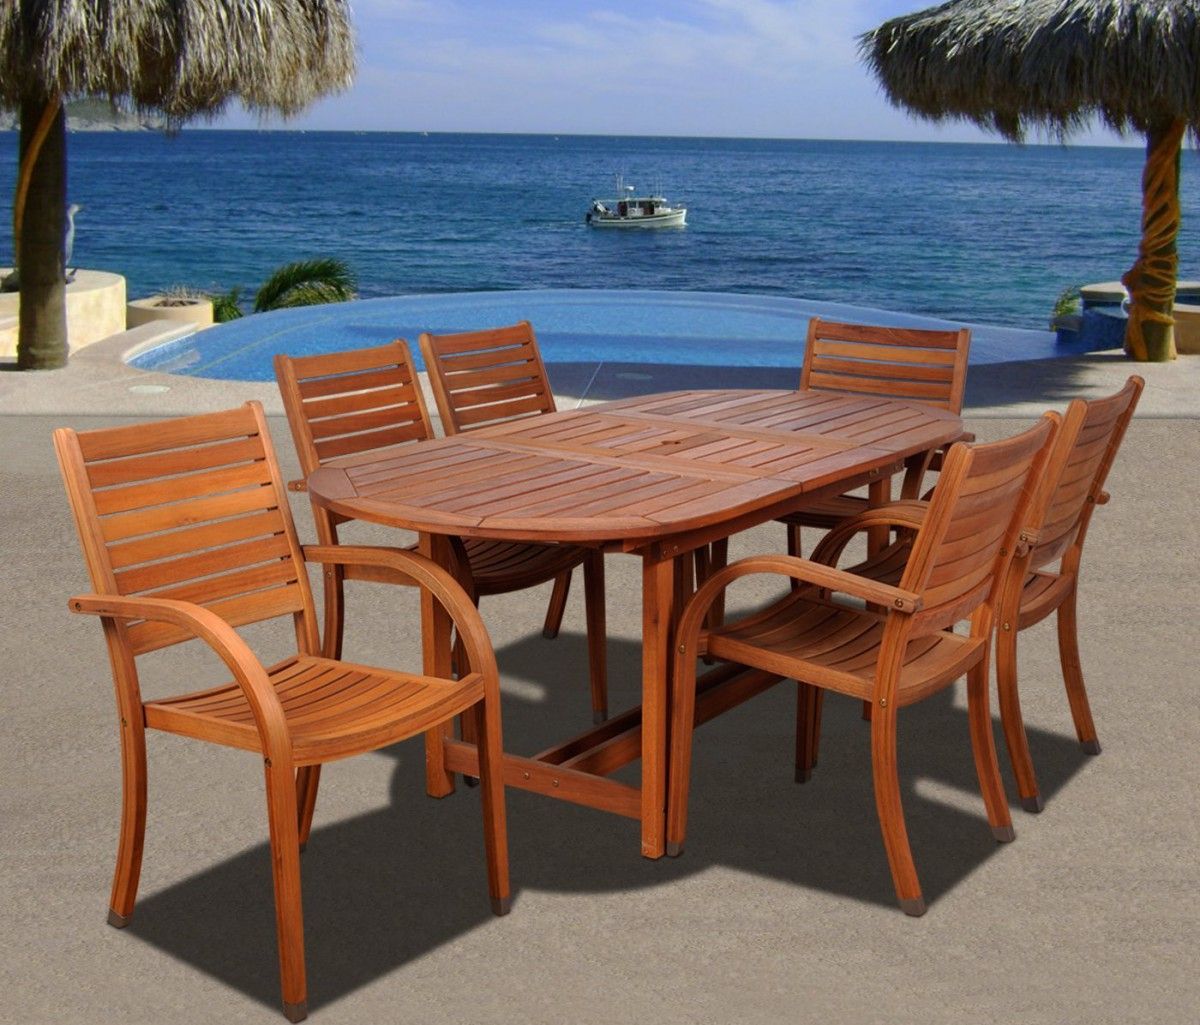 7 Piece Large Patio Dining Sets With Most Recent Amazonia Arizona 7 Piece Wood Outdoor Dining Set With 83" Oval Table (View 9 of 15)